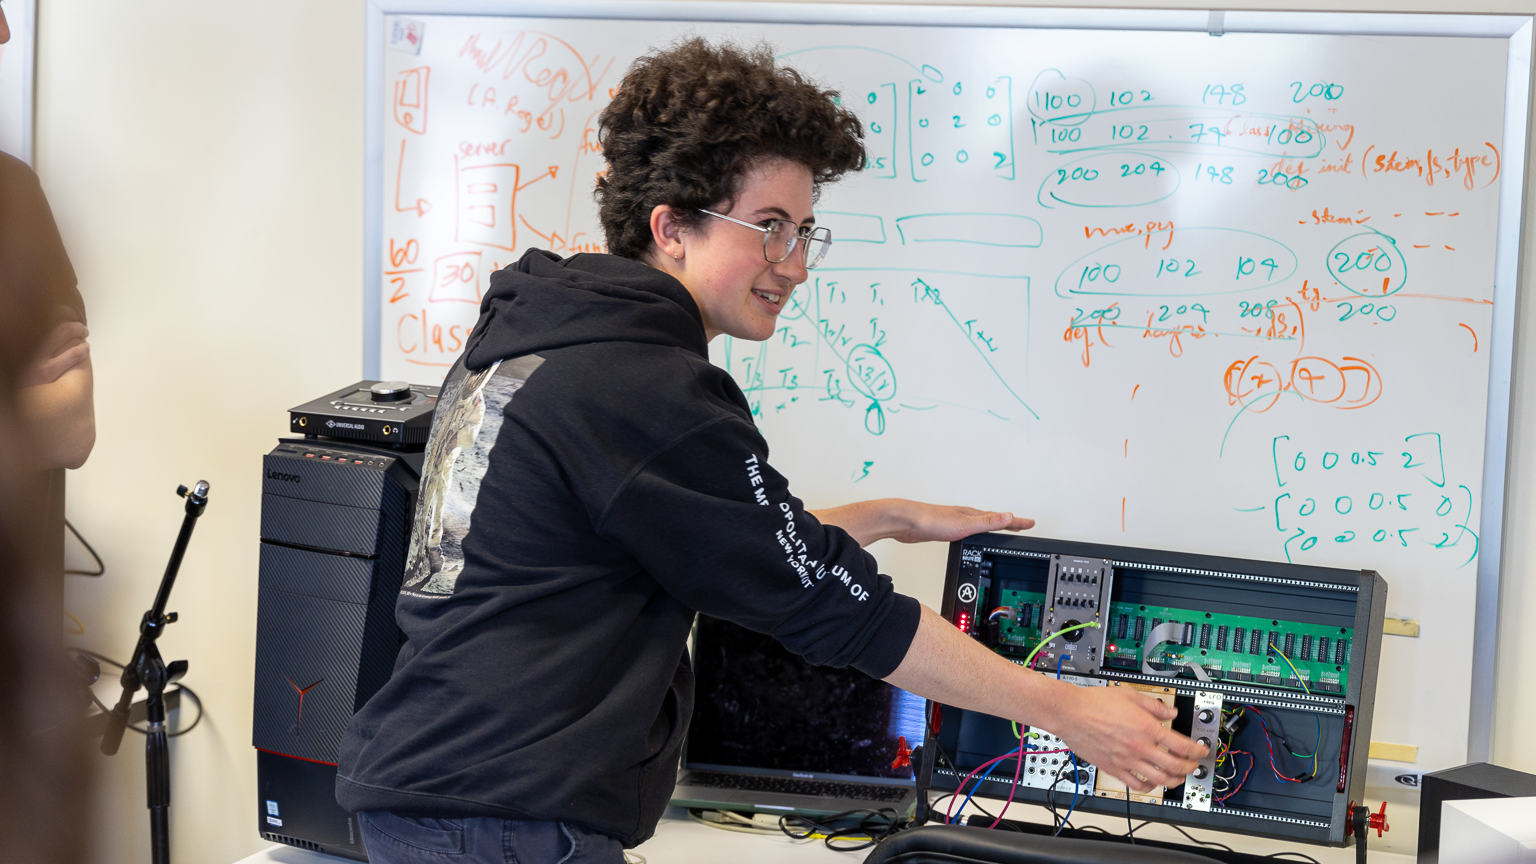 Mir Jeffres pointing to a synthesizer in front of whiteboard showing matrix math